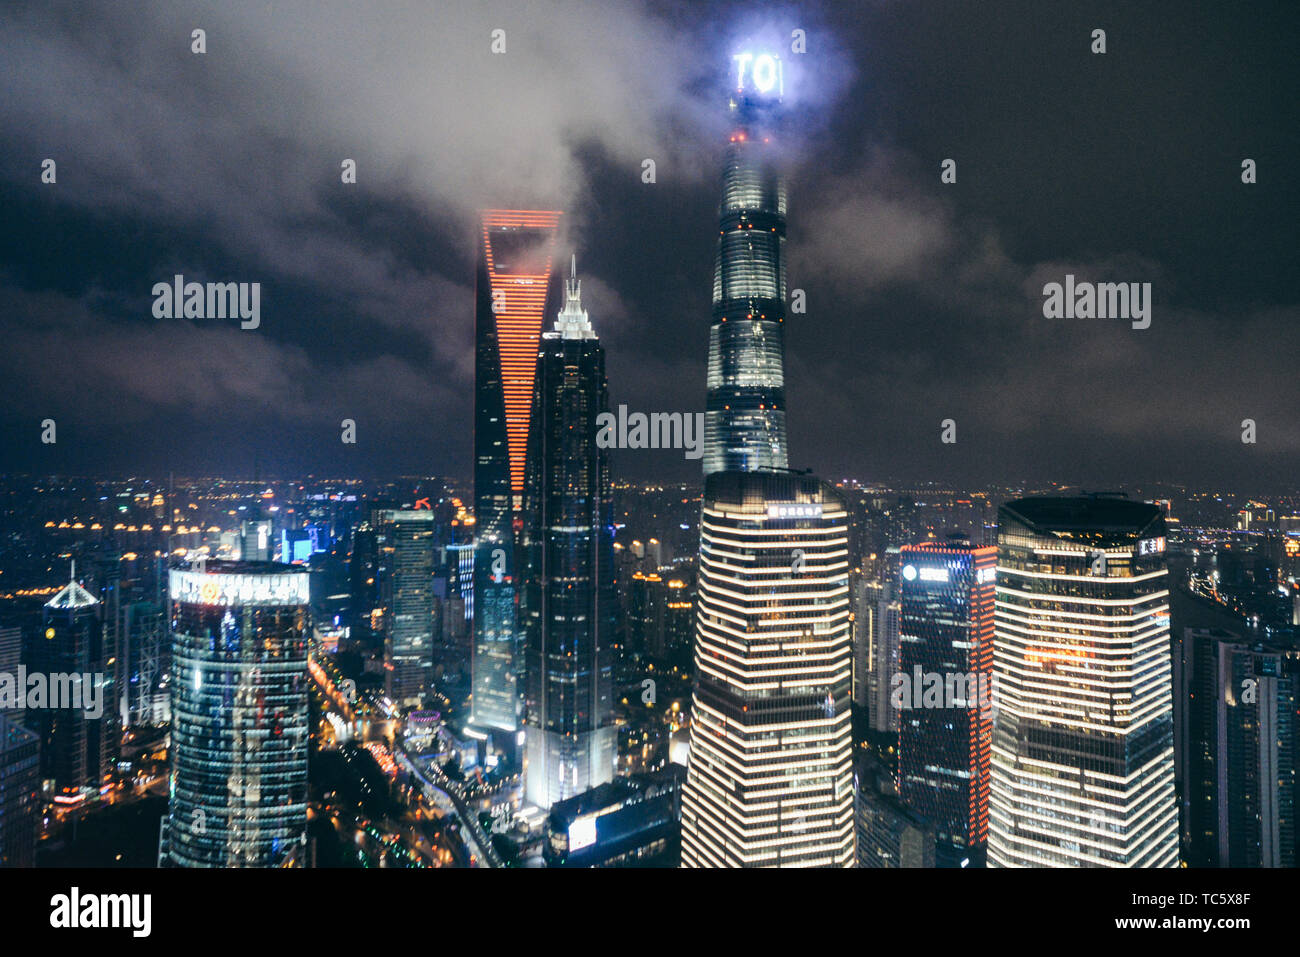 Shanghai Pudong New Area Stock Photo - Alamy